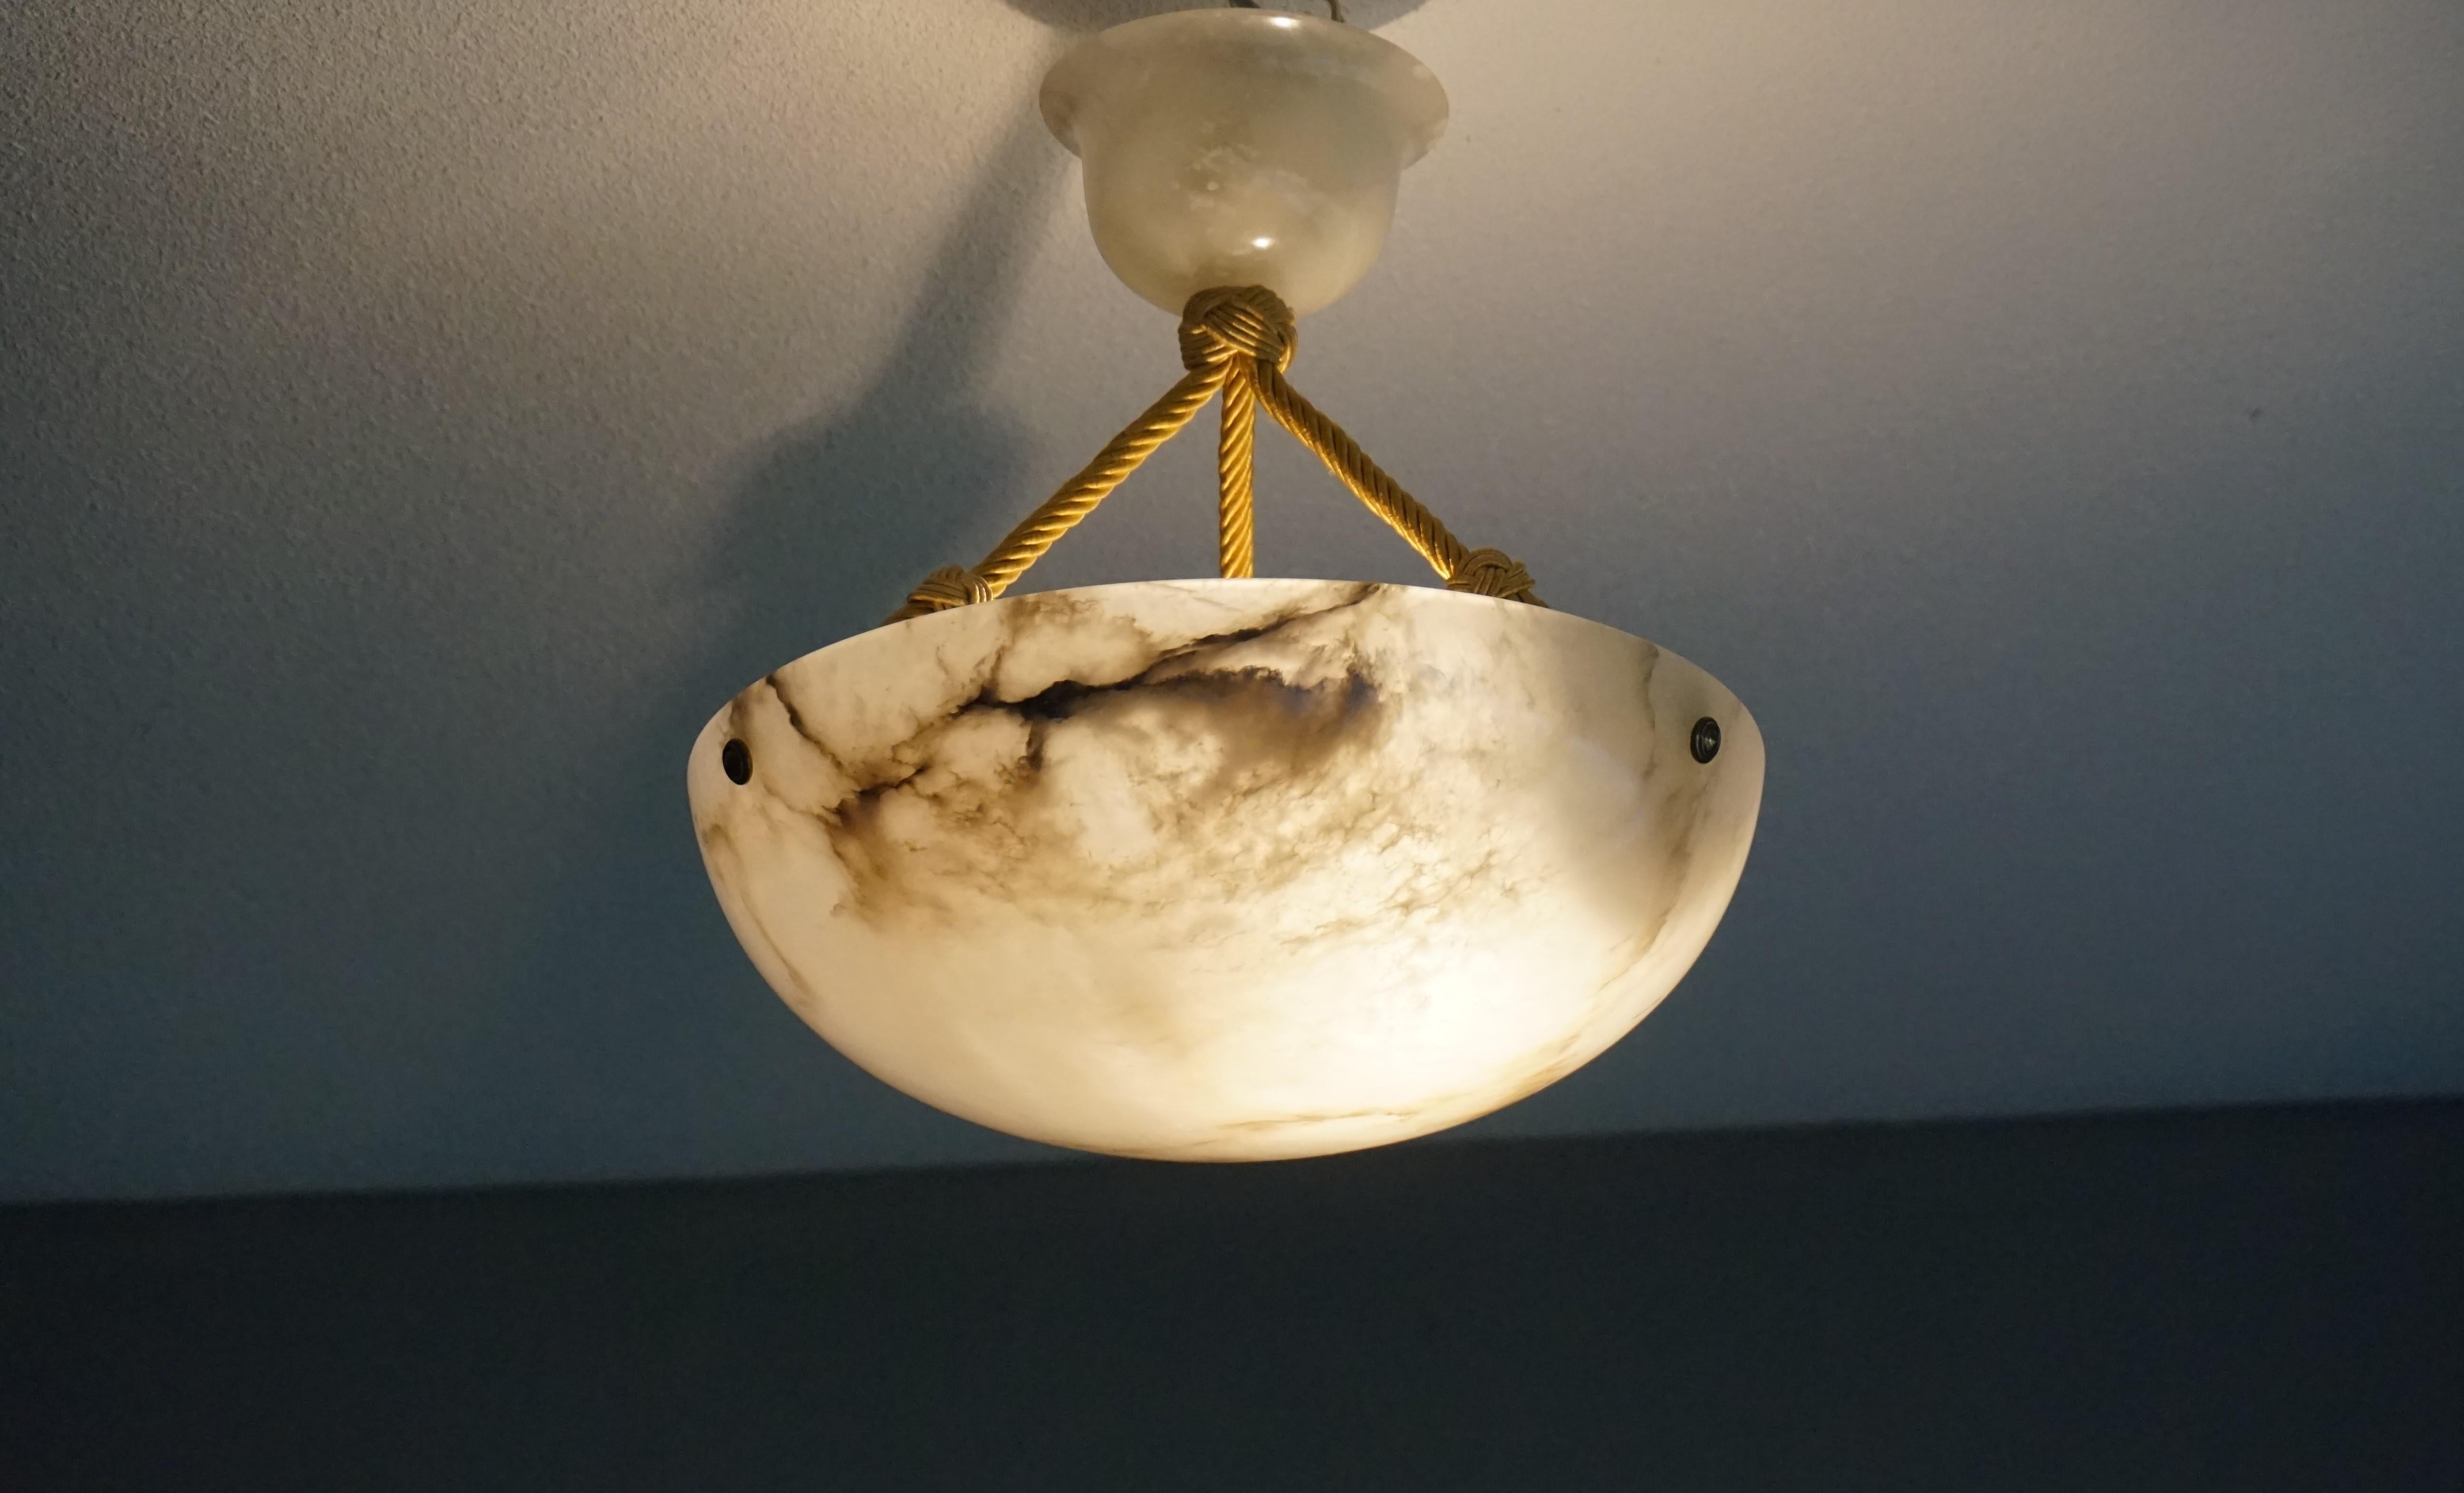 Marvelous antique light fixture for an entry hall, bedroom or any other small room.

With early 20th century light fixtures being one of our specialties, we always love finding timeless pendants and flush mounts we have never seen before. This